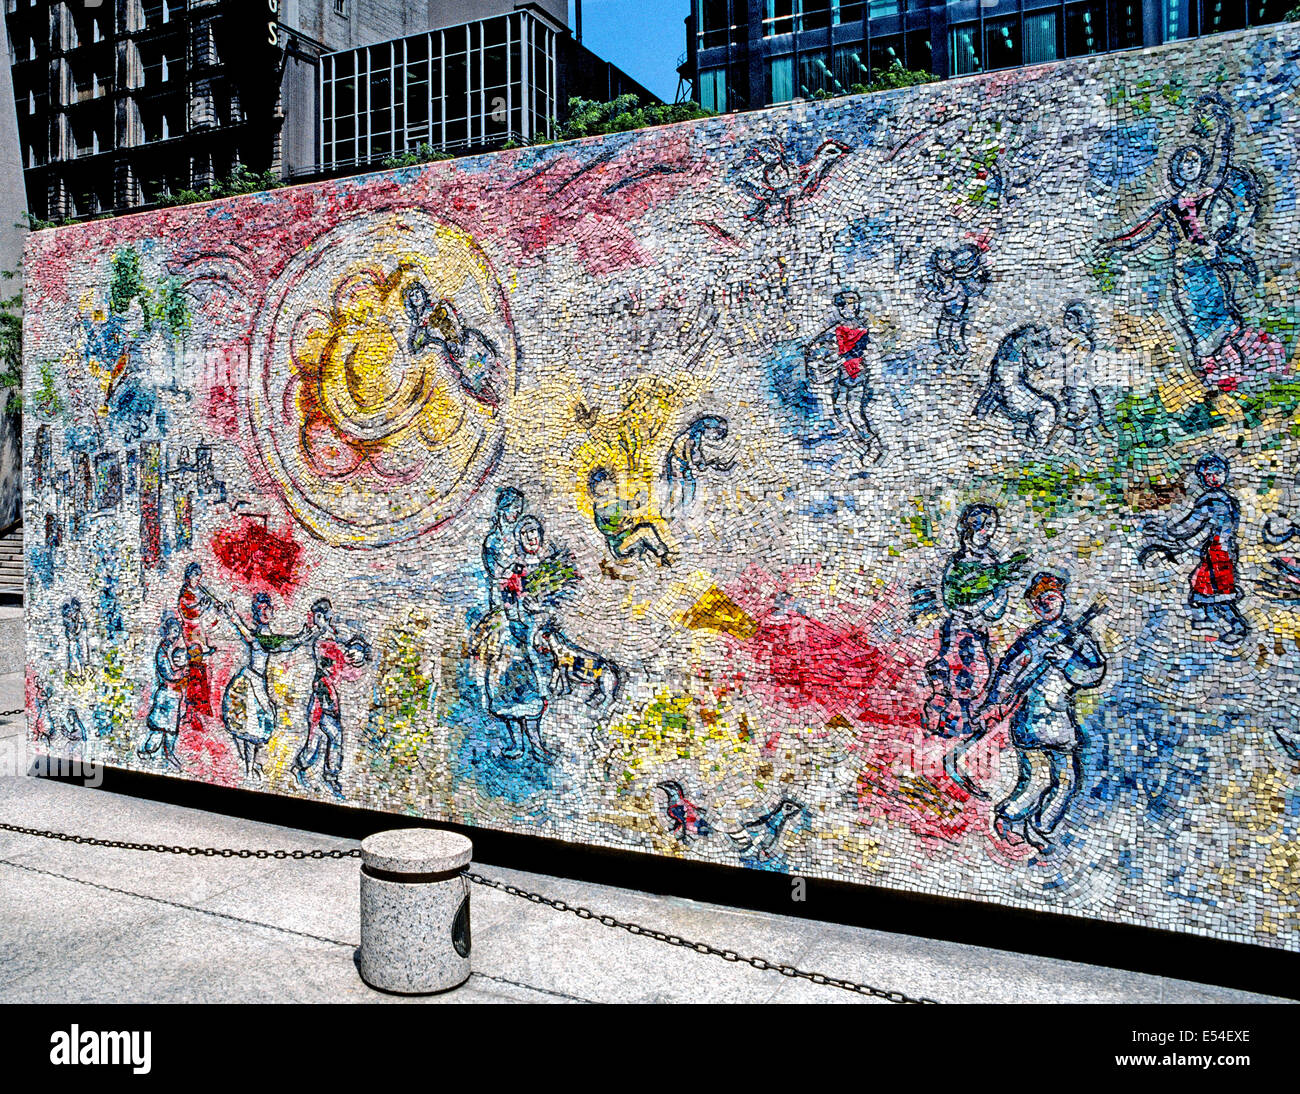 'The Four Seasons' mosaic by French artist Marc Chagall is one of the most monumental works of outdoor public art in Chicago, Illinois, USA. Stock Photo